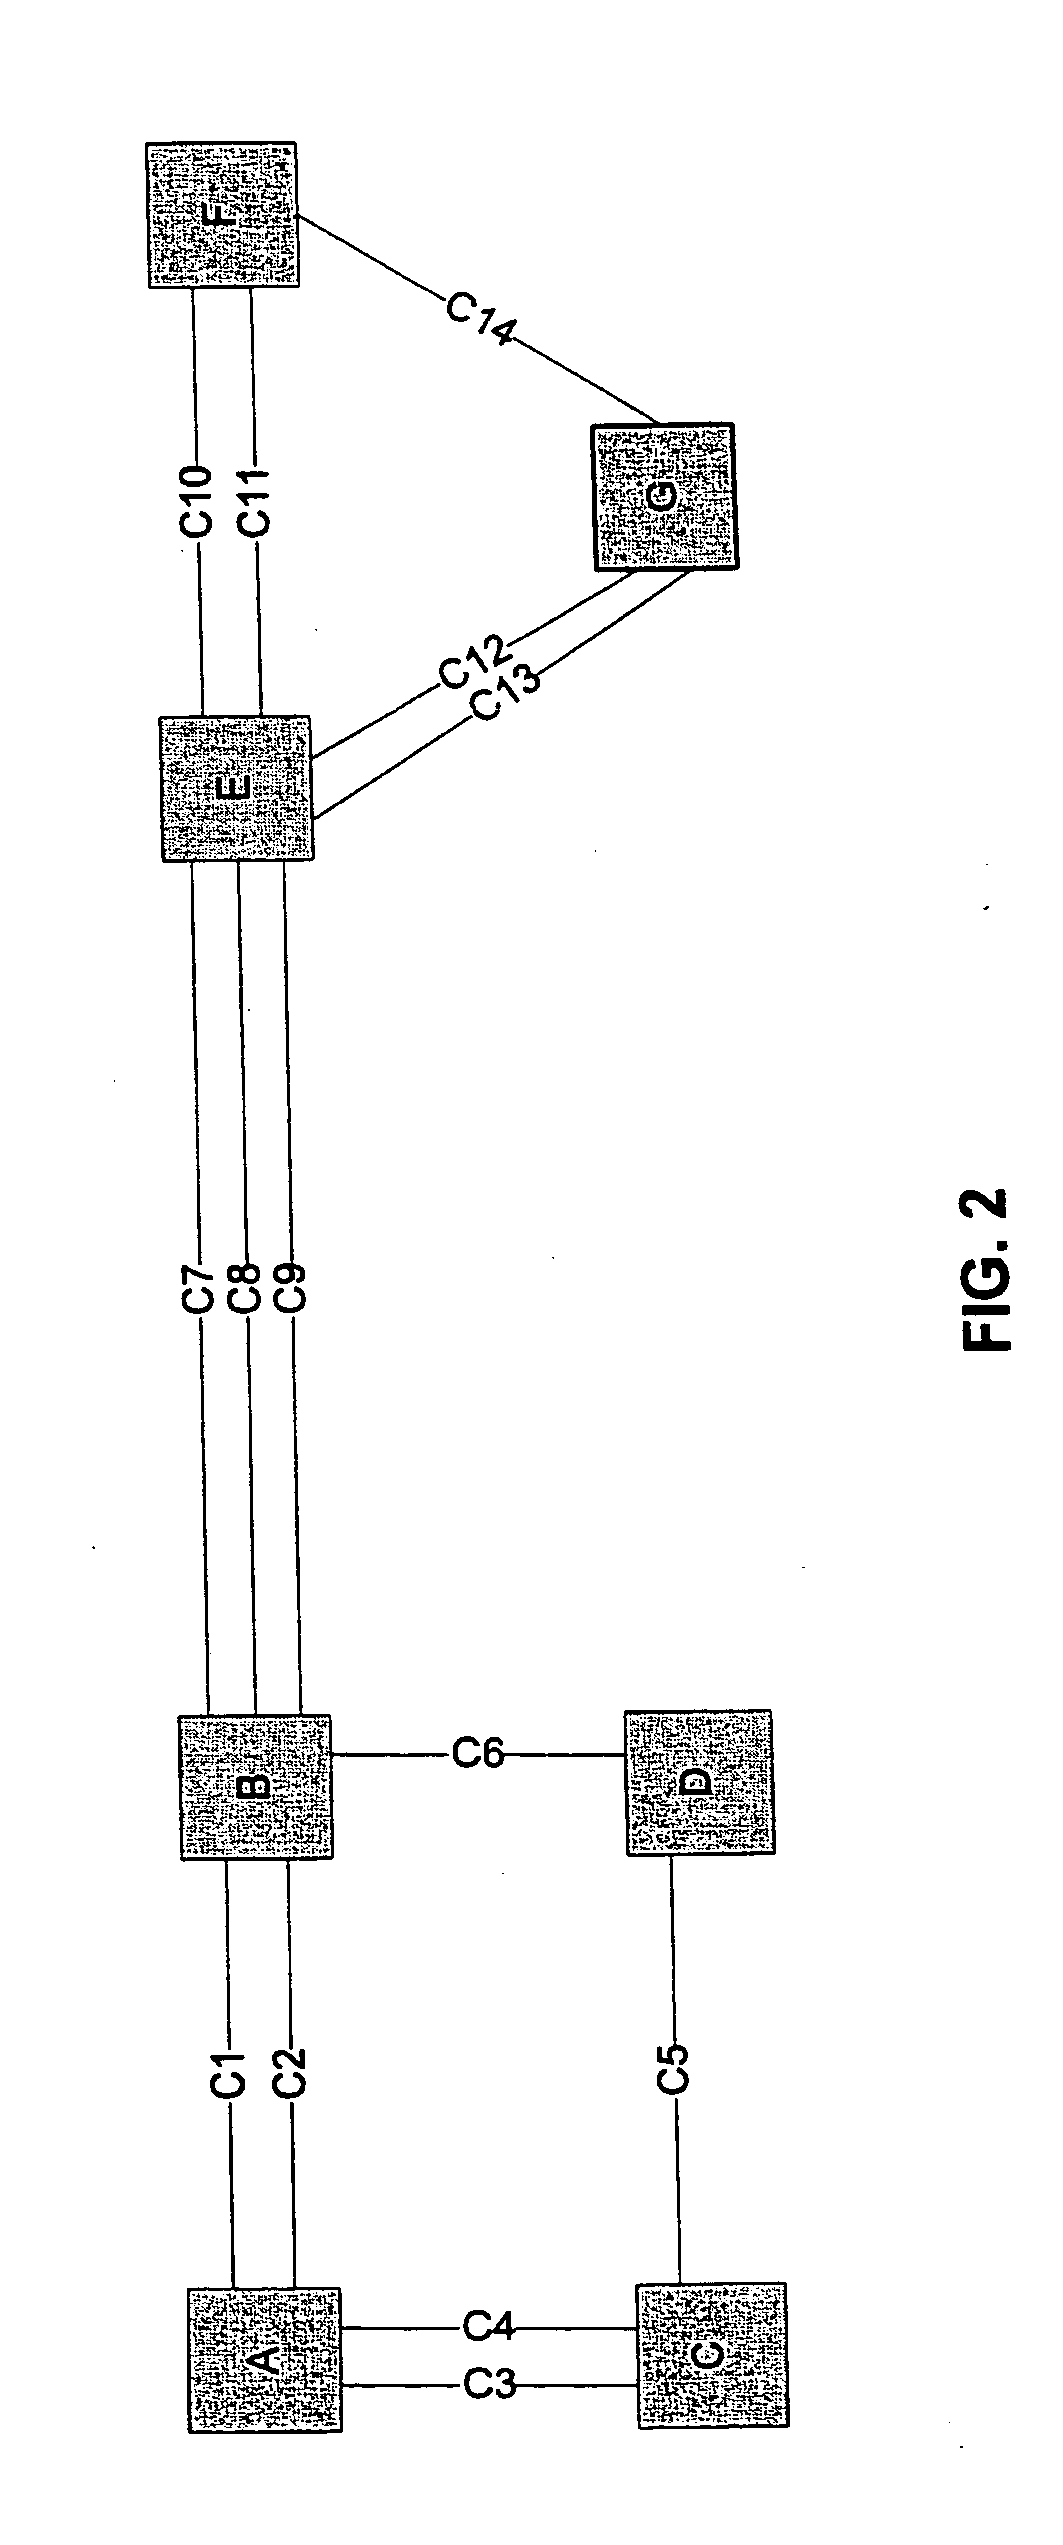 Method, system and apparatus for communications circuit design